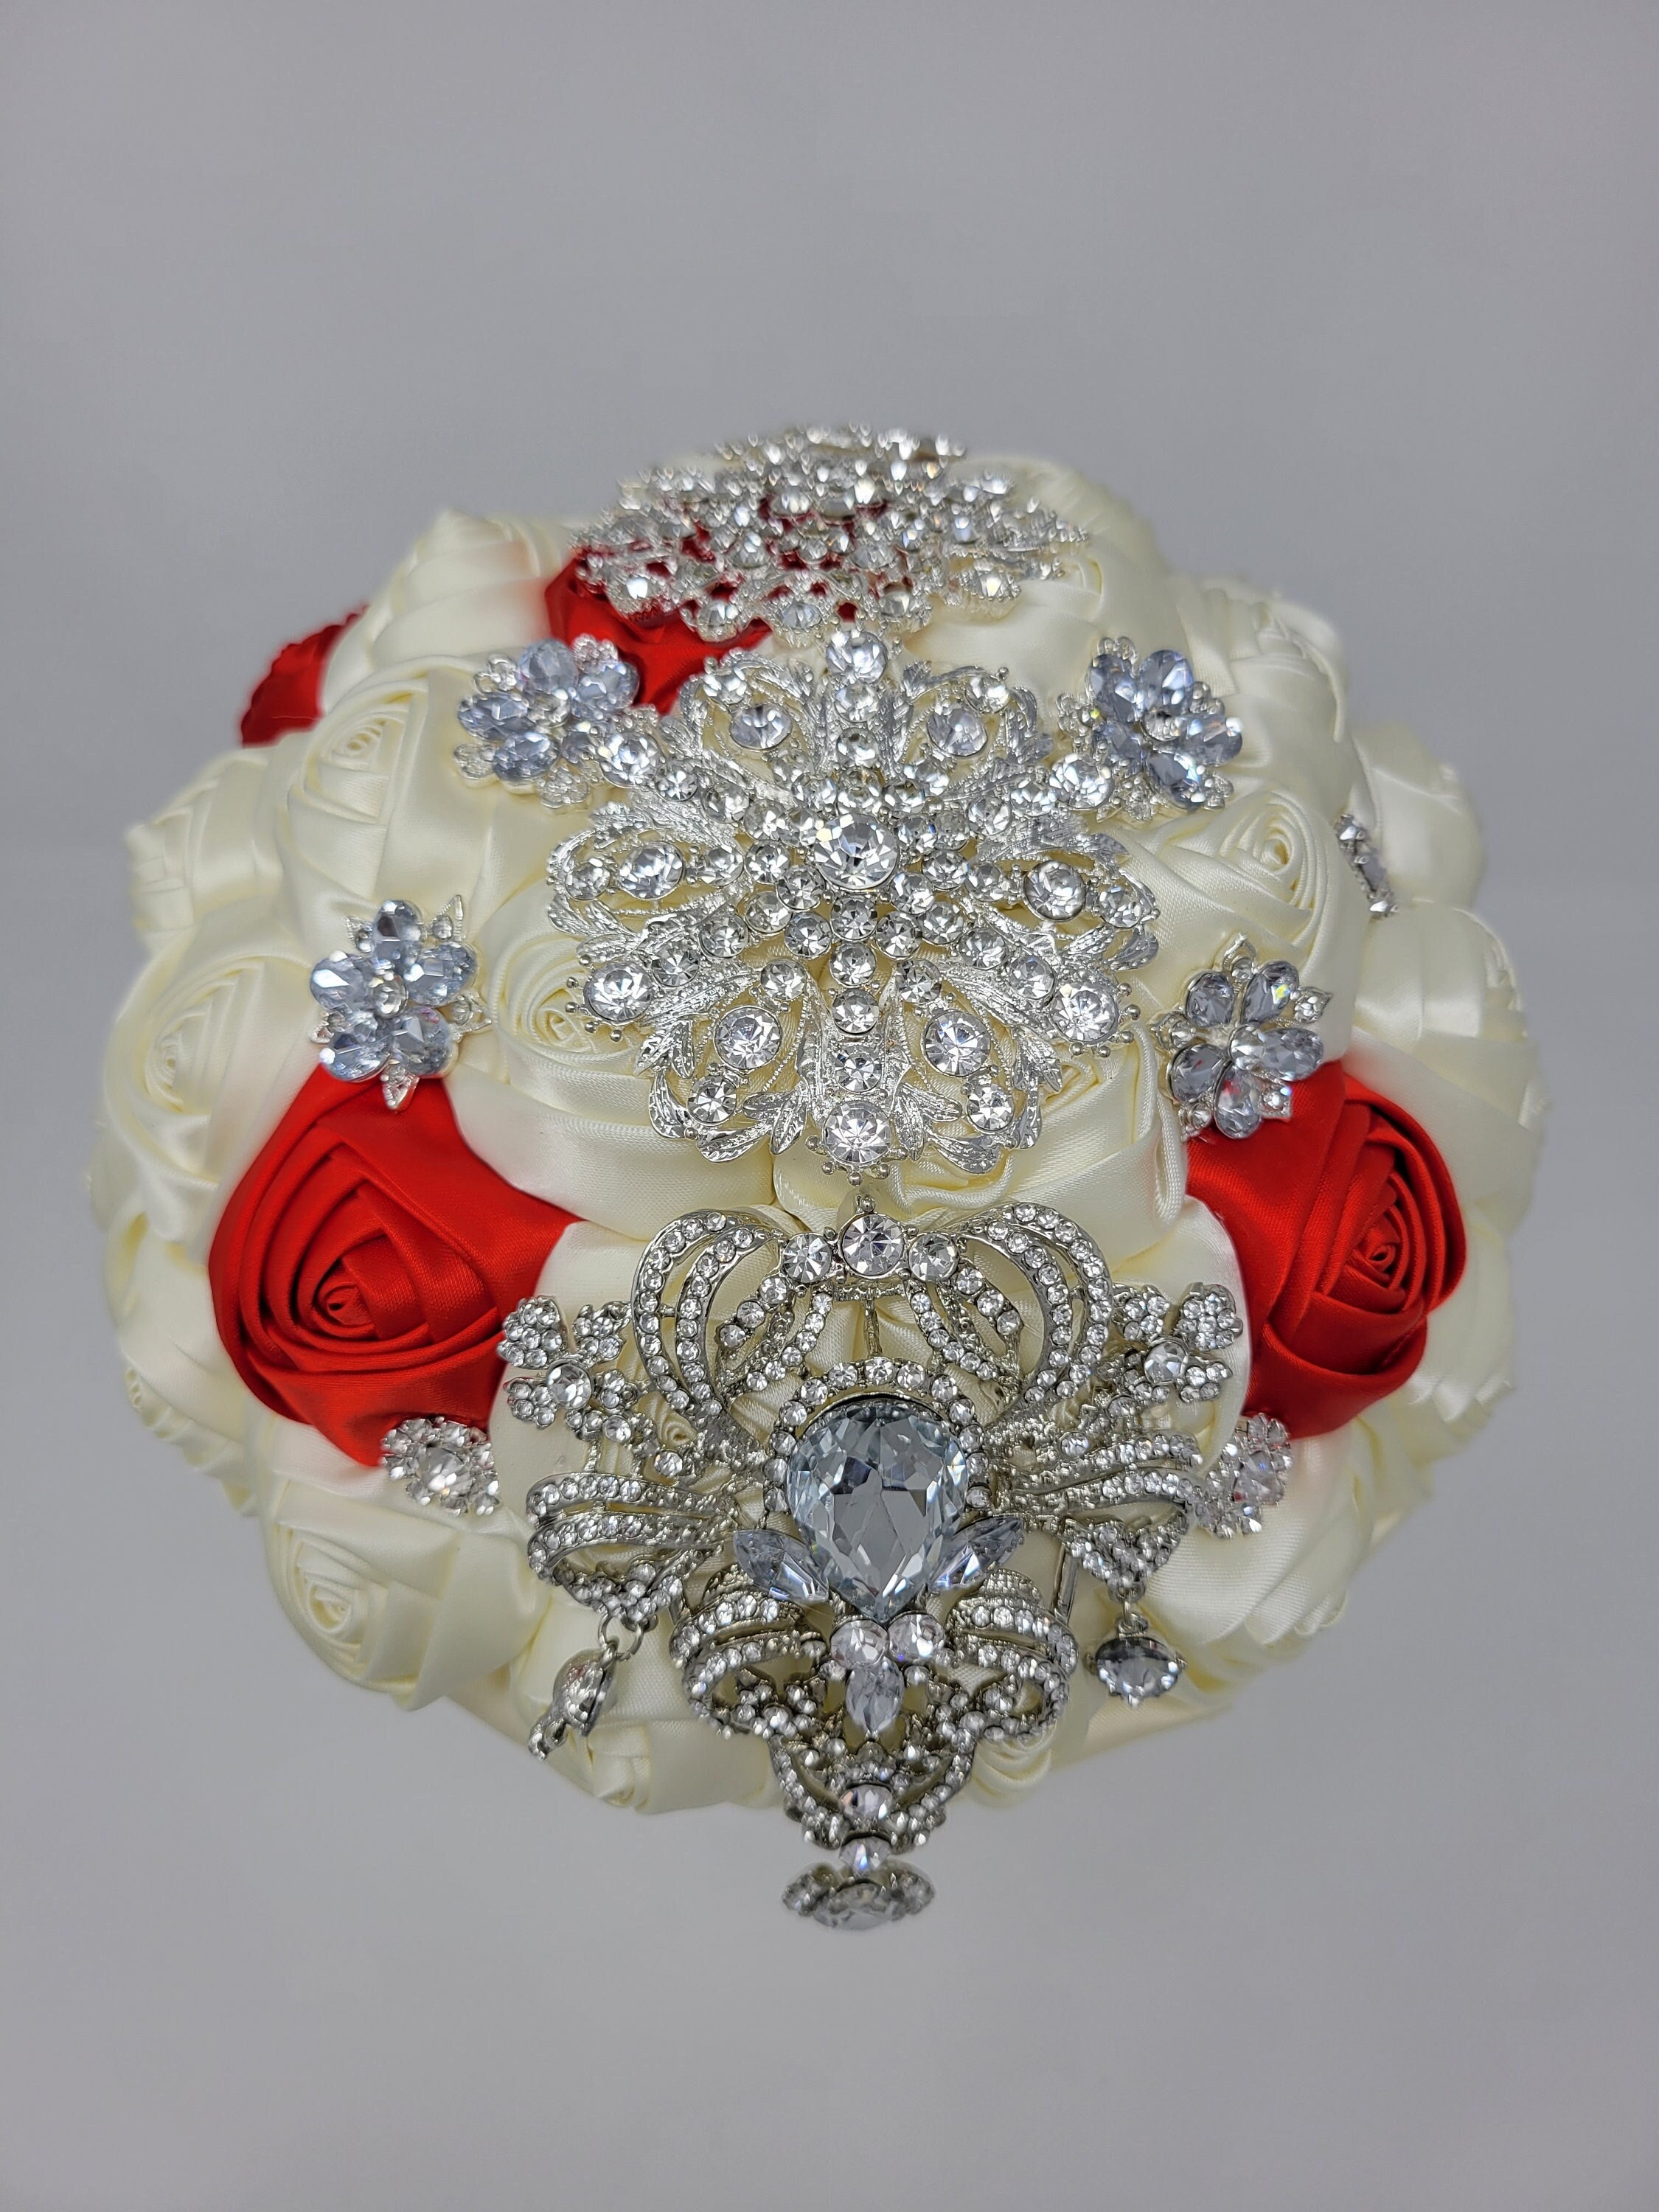 Red roses with diamond studs poked through! Super elegant  Red bouquet  wedding, Rose bridal bouquet, Red rose wedding